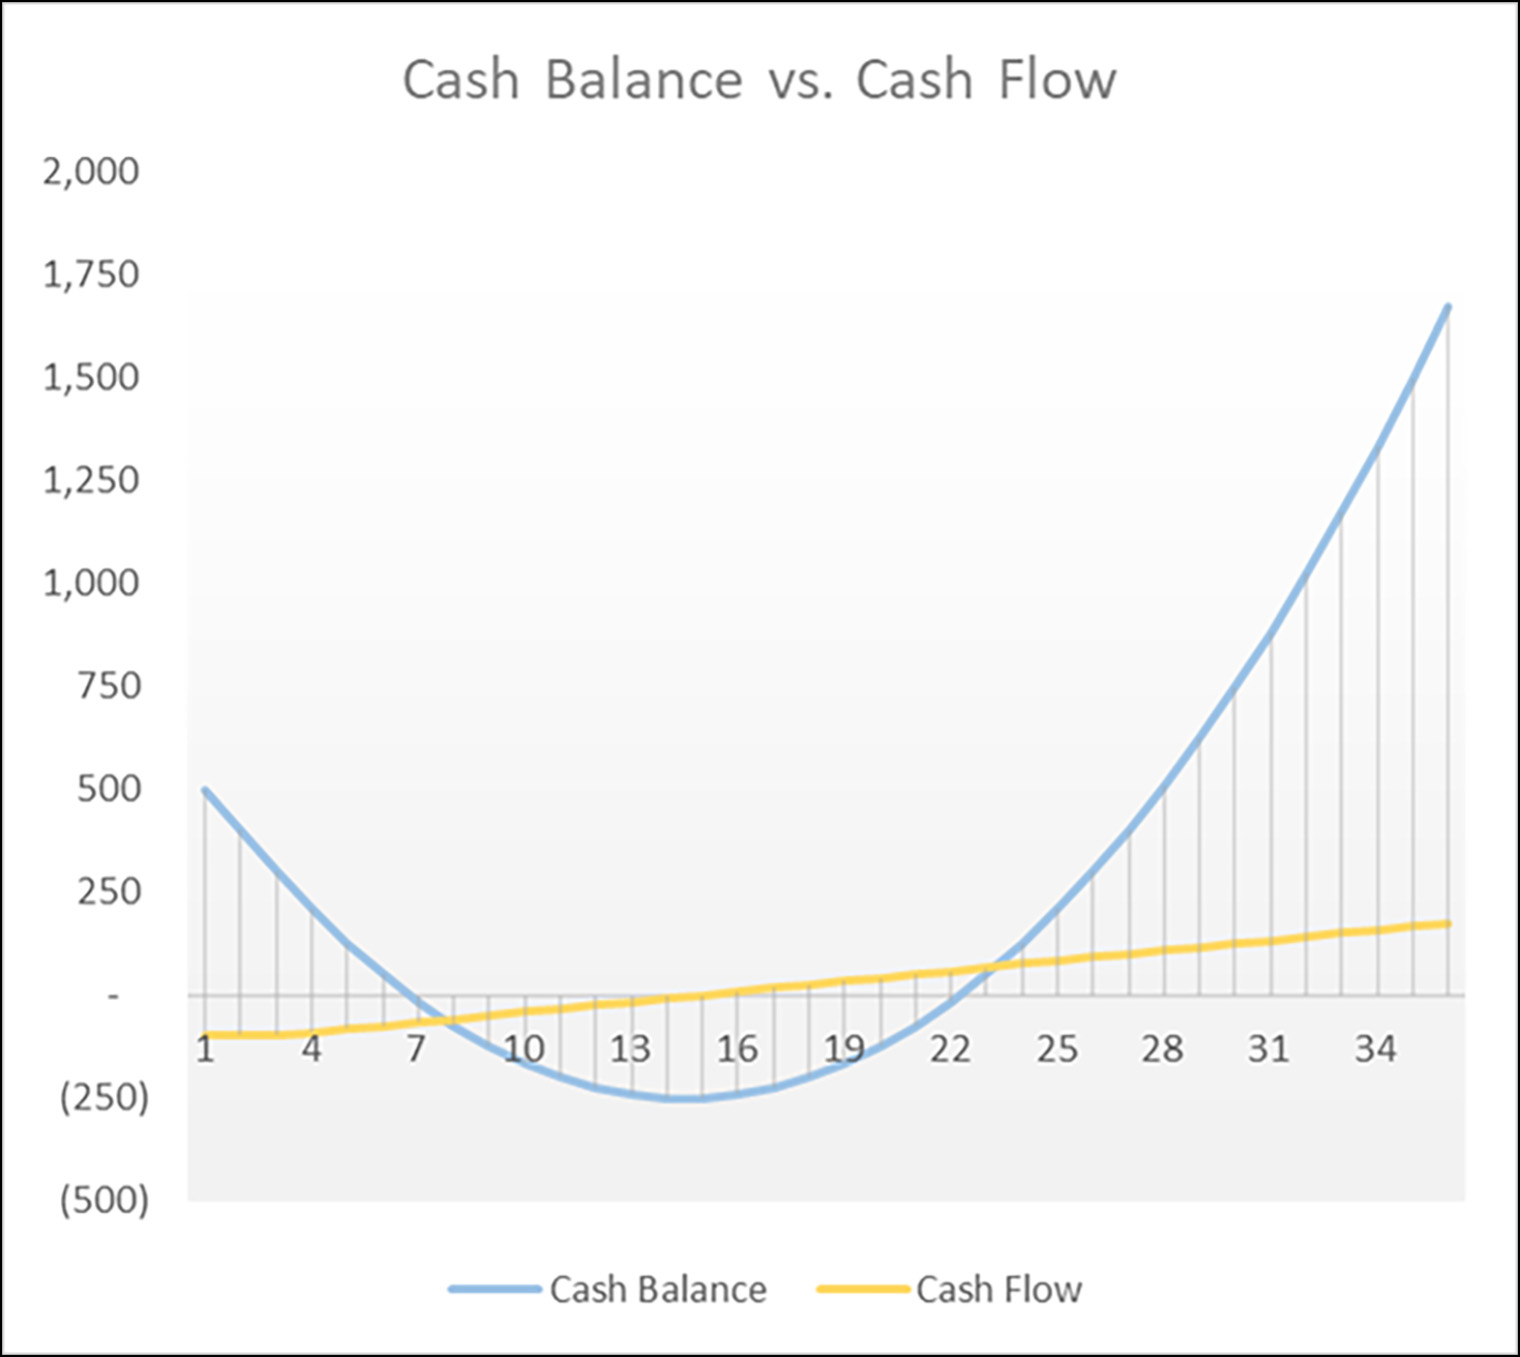 How Using SaaS Metrics Leads to Better Cash Flow Understanding and Performance Balance vs Flow